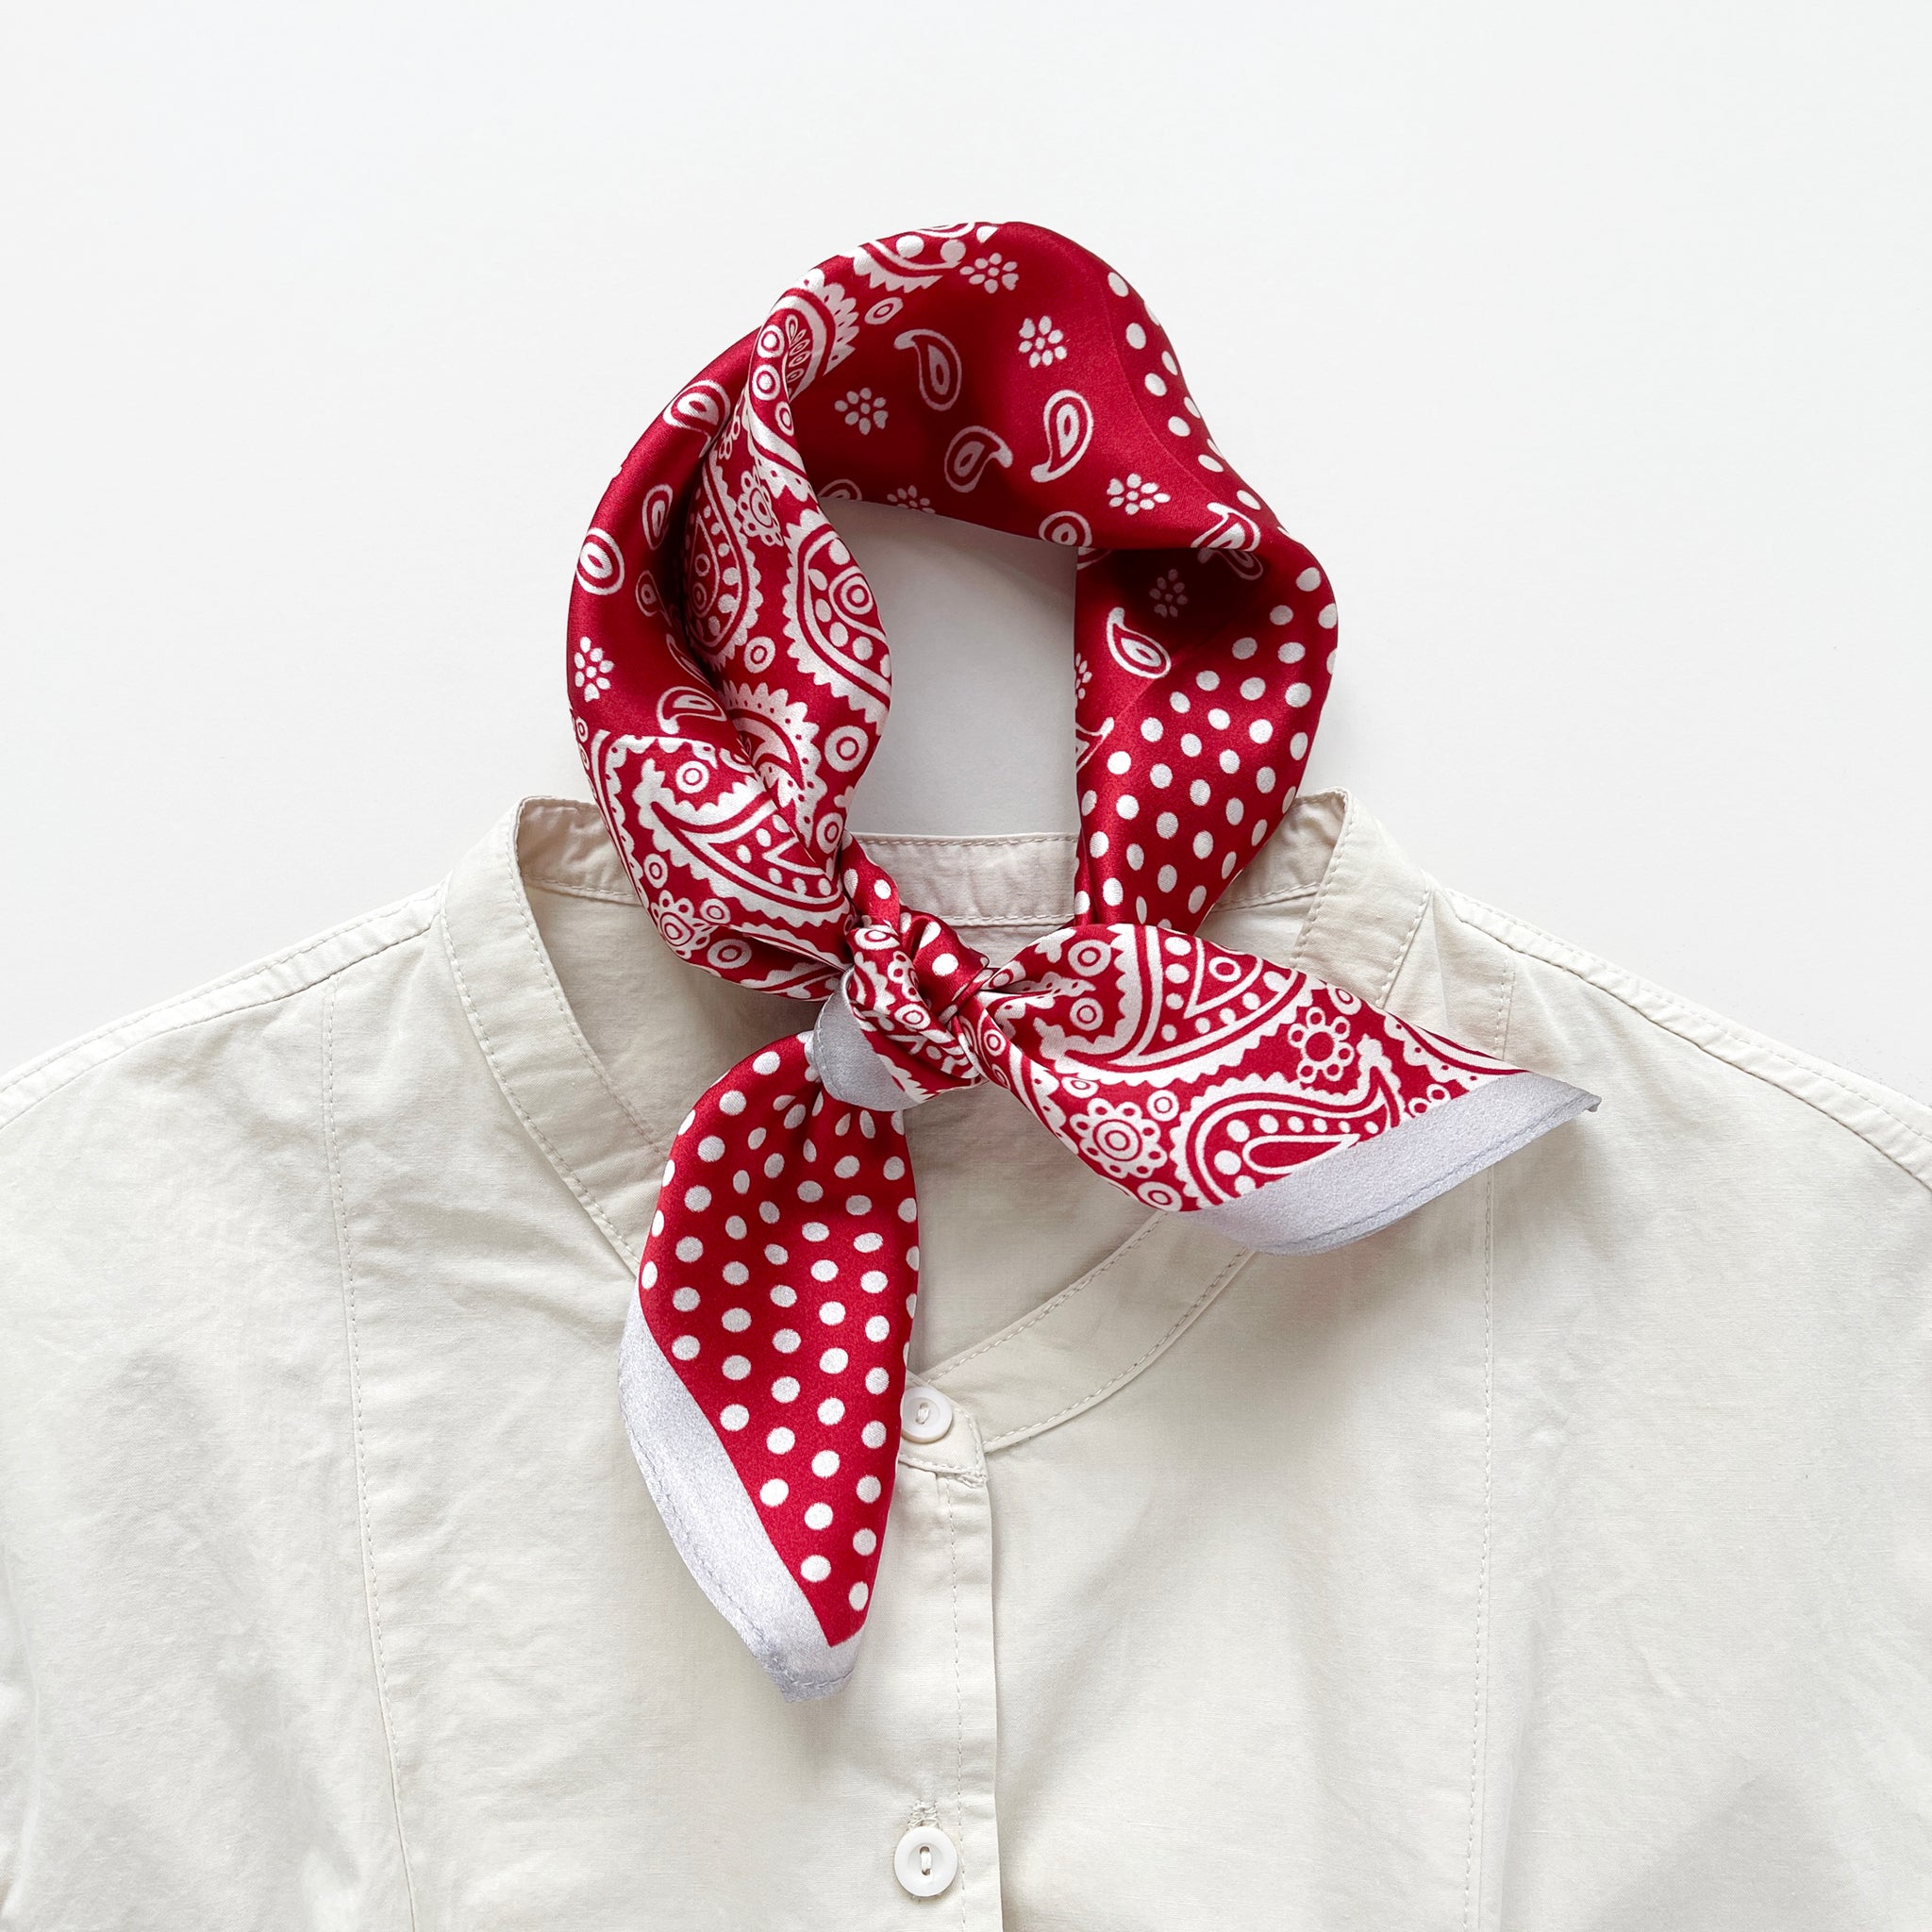 a vibrant red silk bandana scarf featuring paisley and polka dot pattern, knotted as a neckerchief, paired with a light beige turtle neck shirt